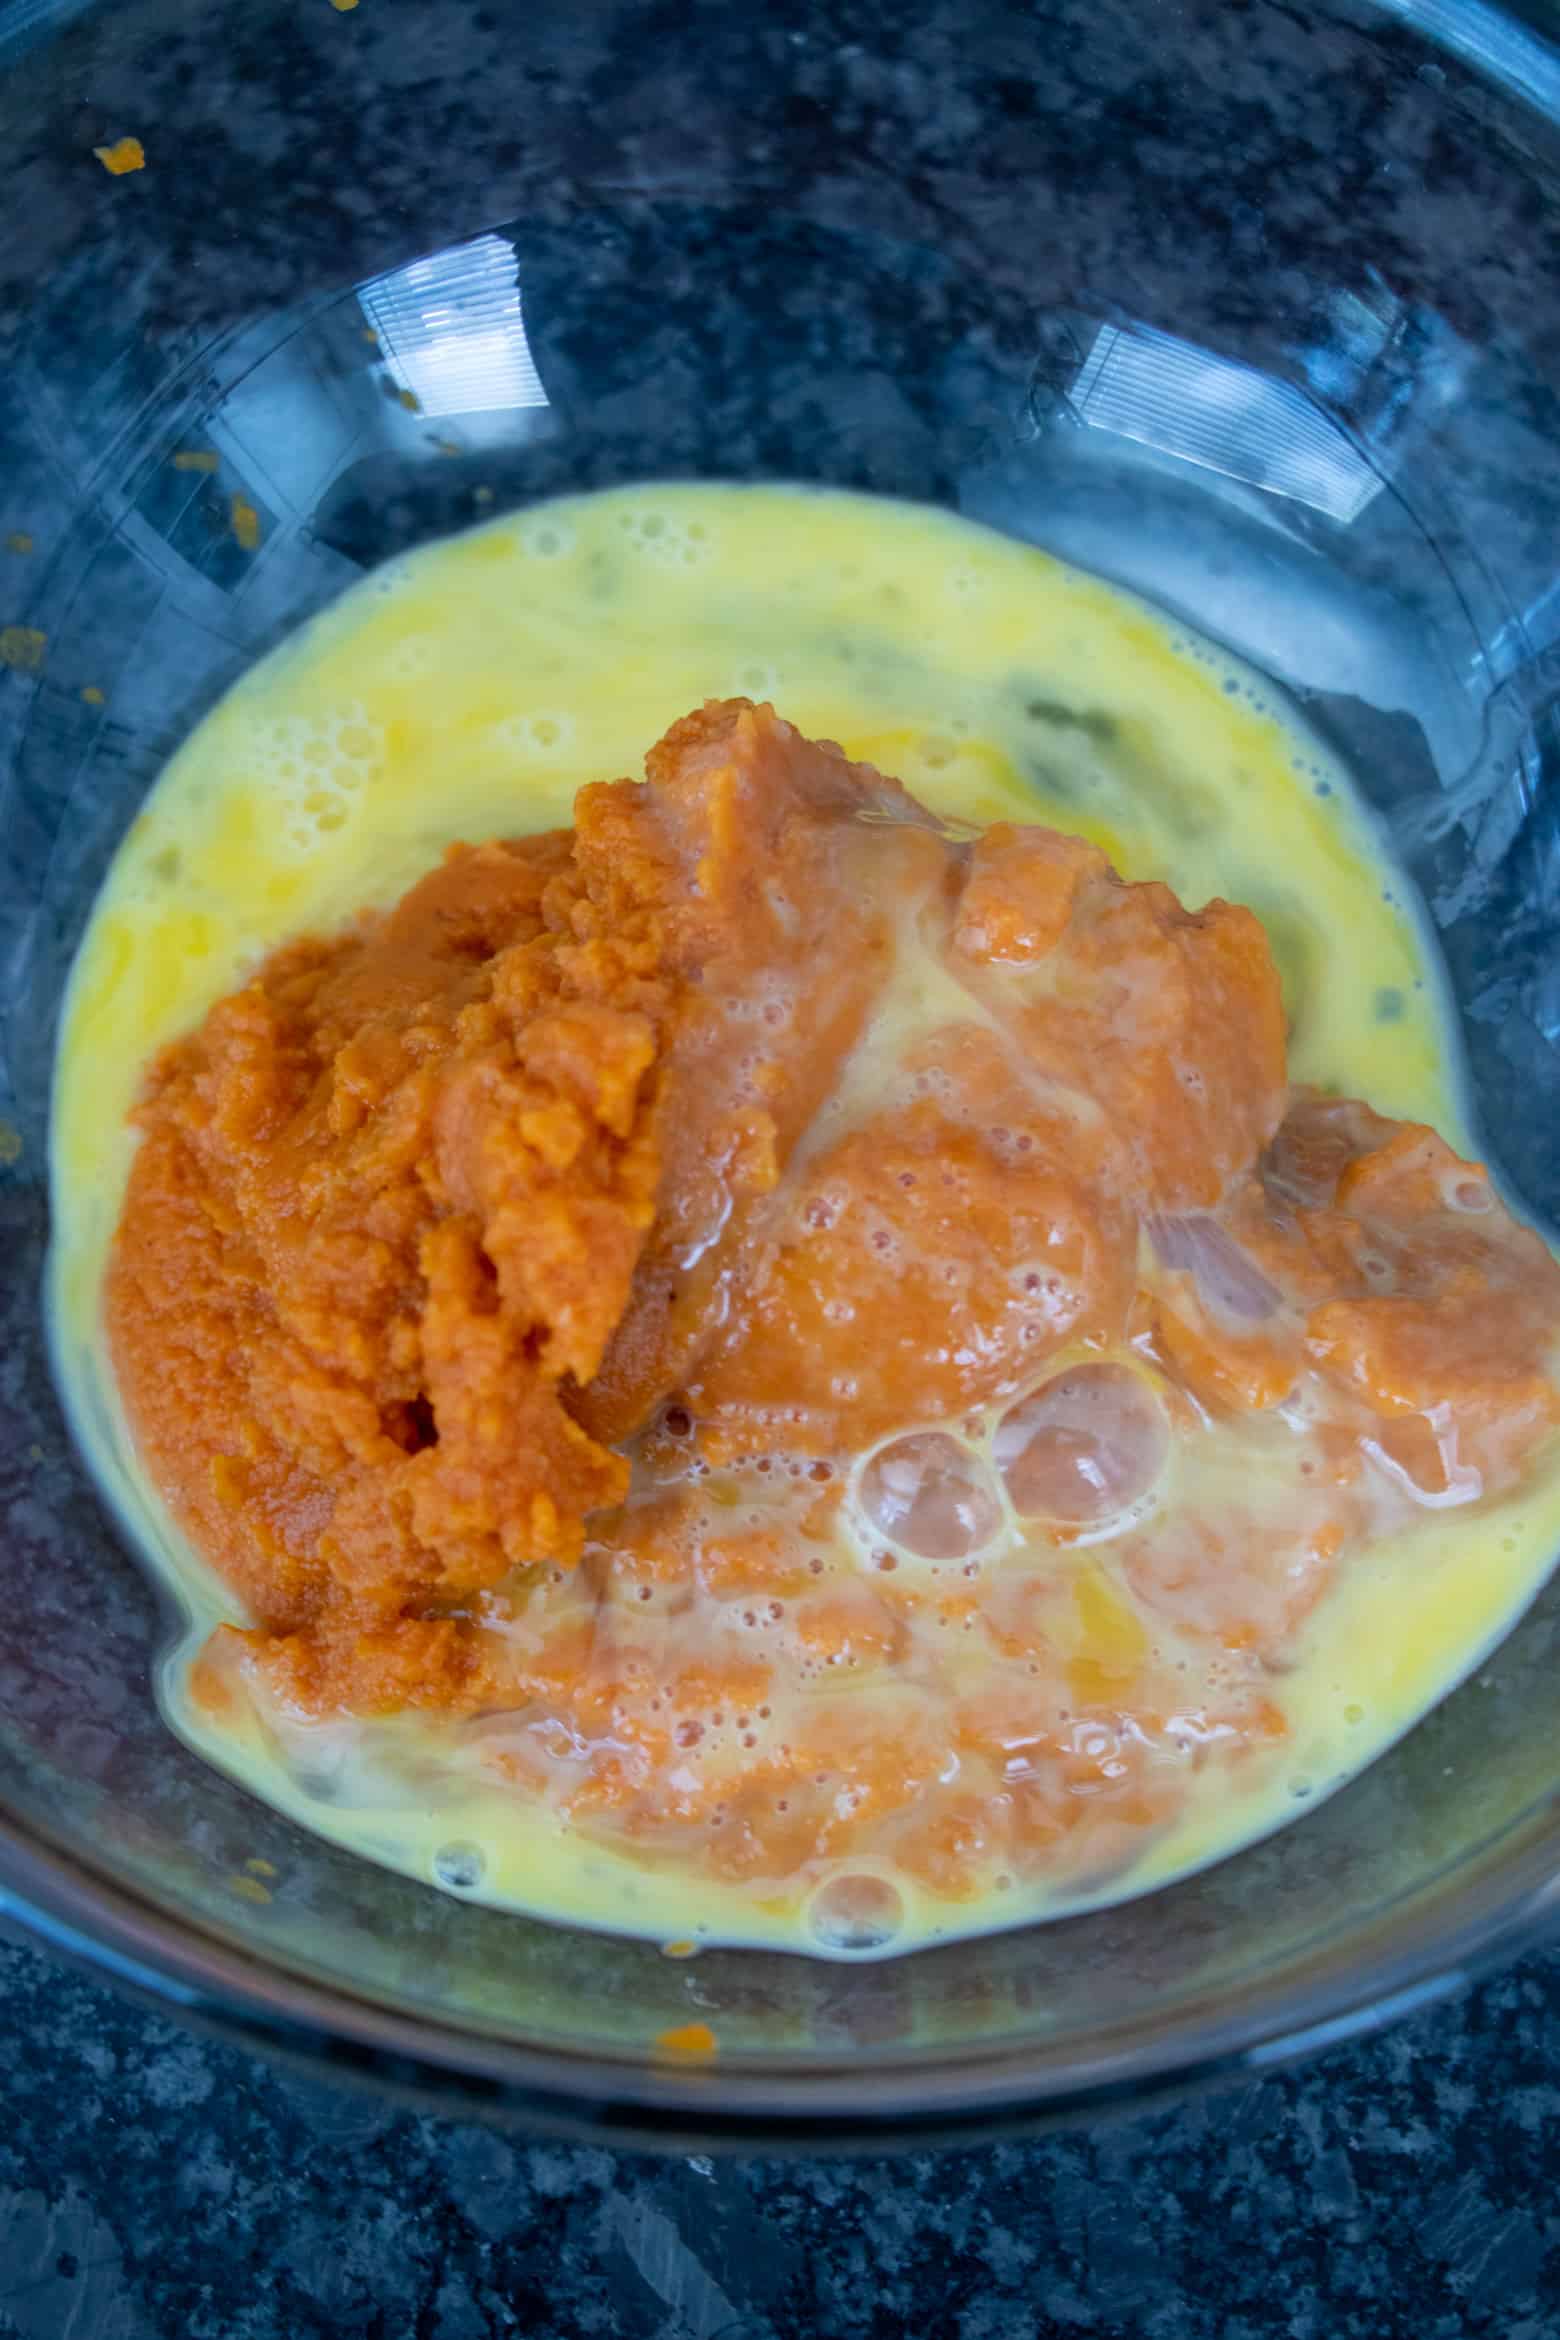 Pumpkin puree and egg in a bowl